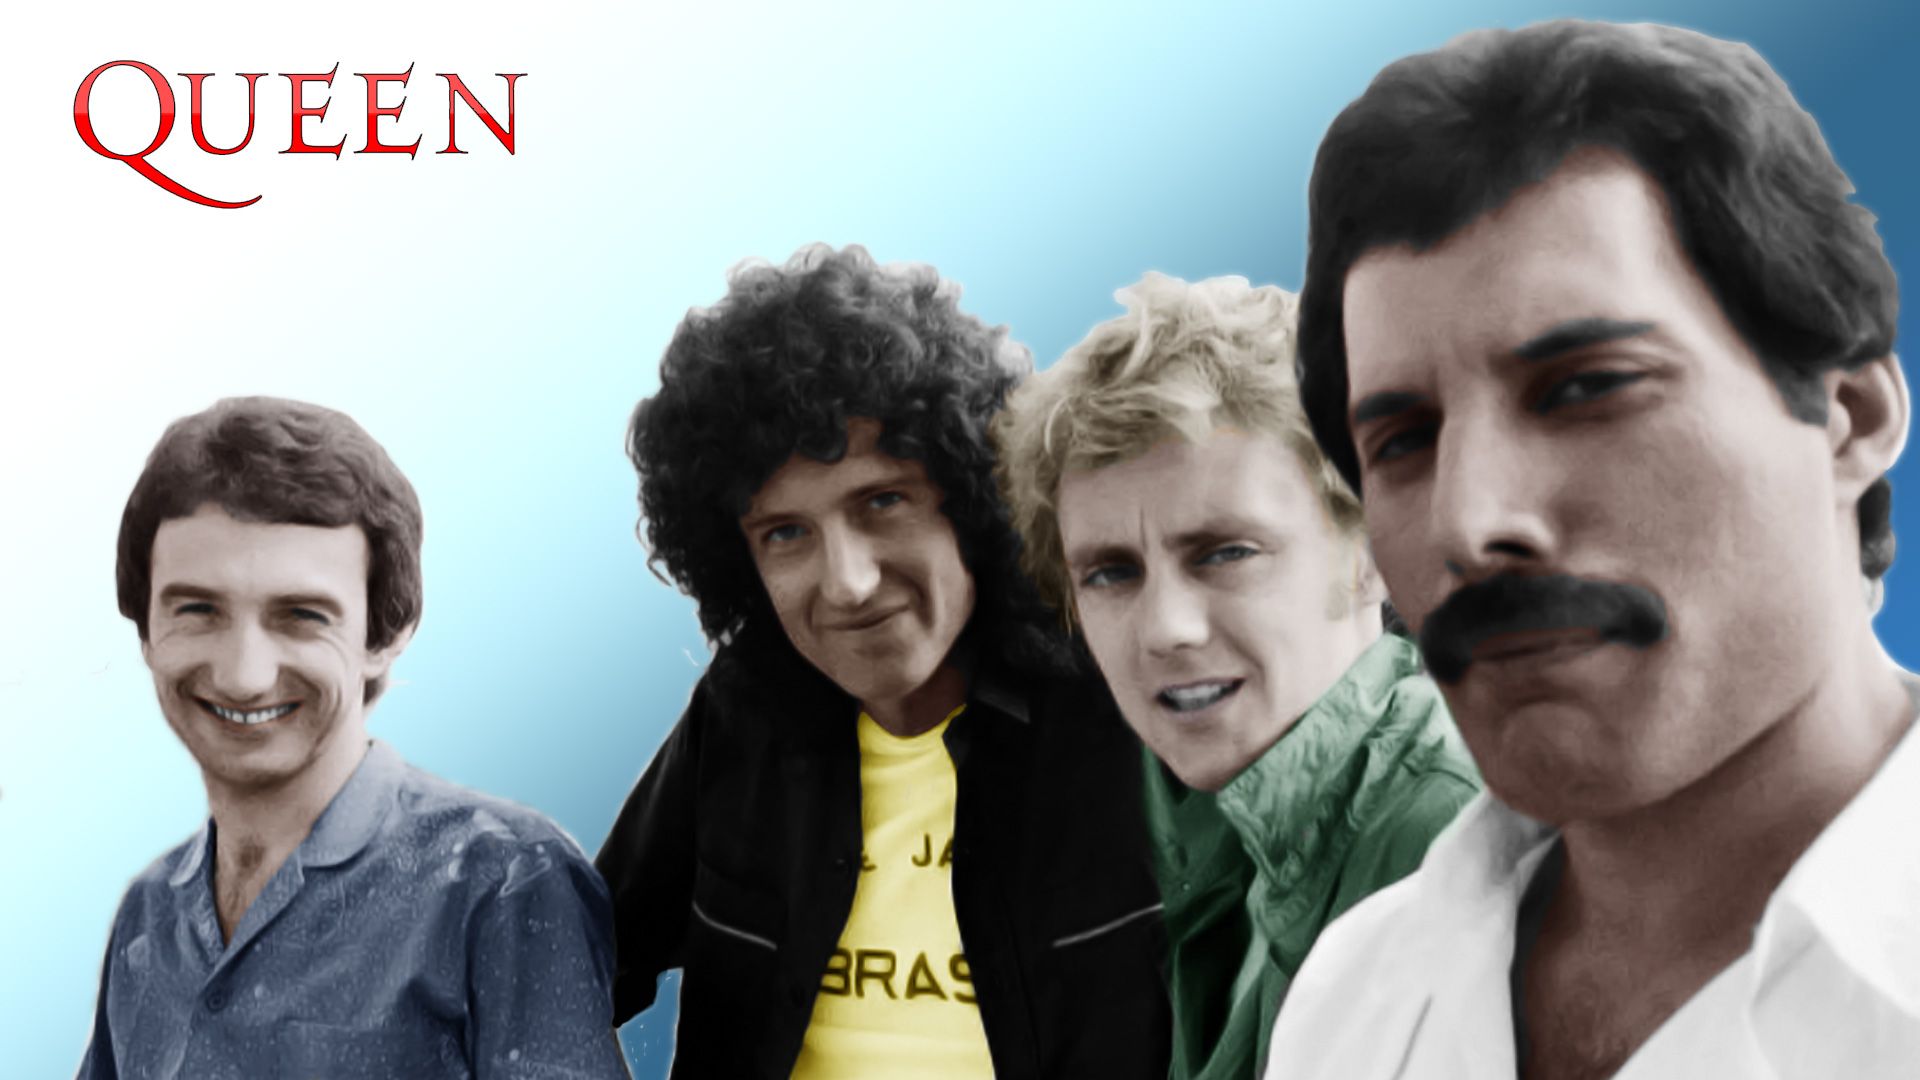 Queen The Band Wallpapers - Wallpaper Cave